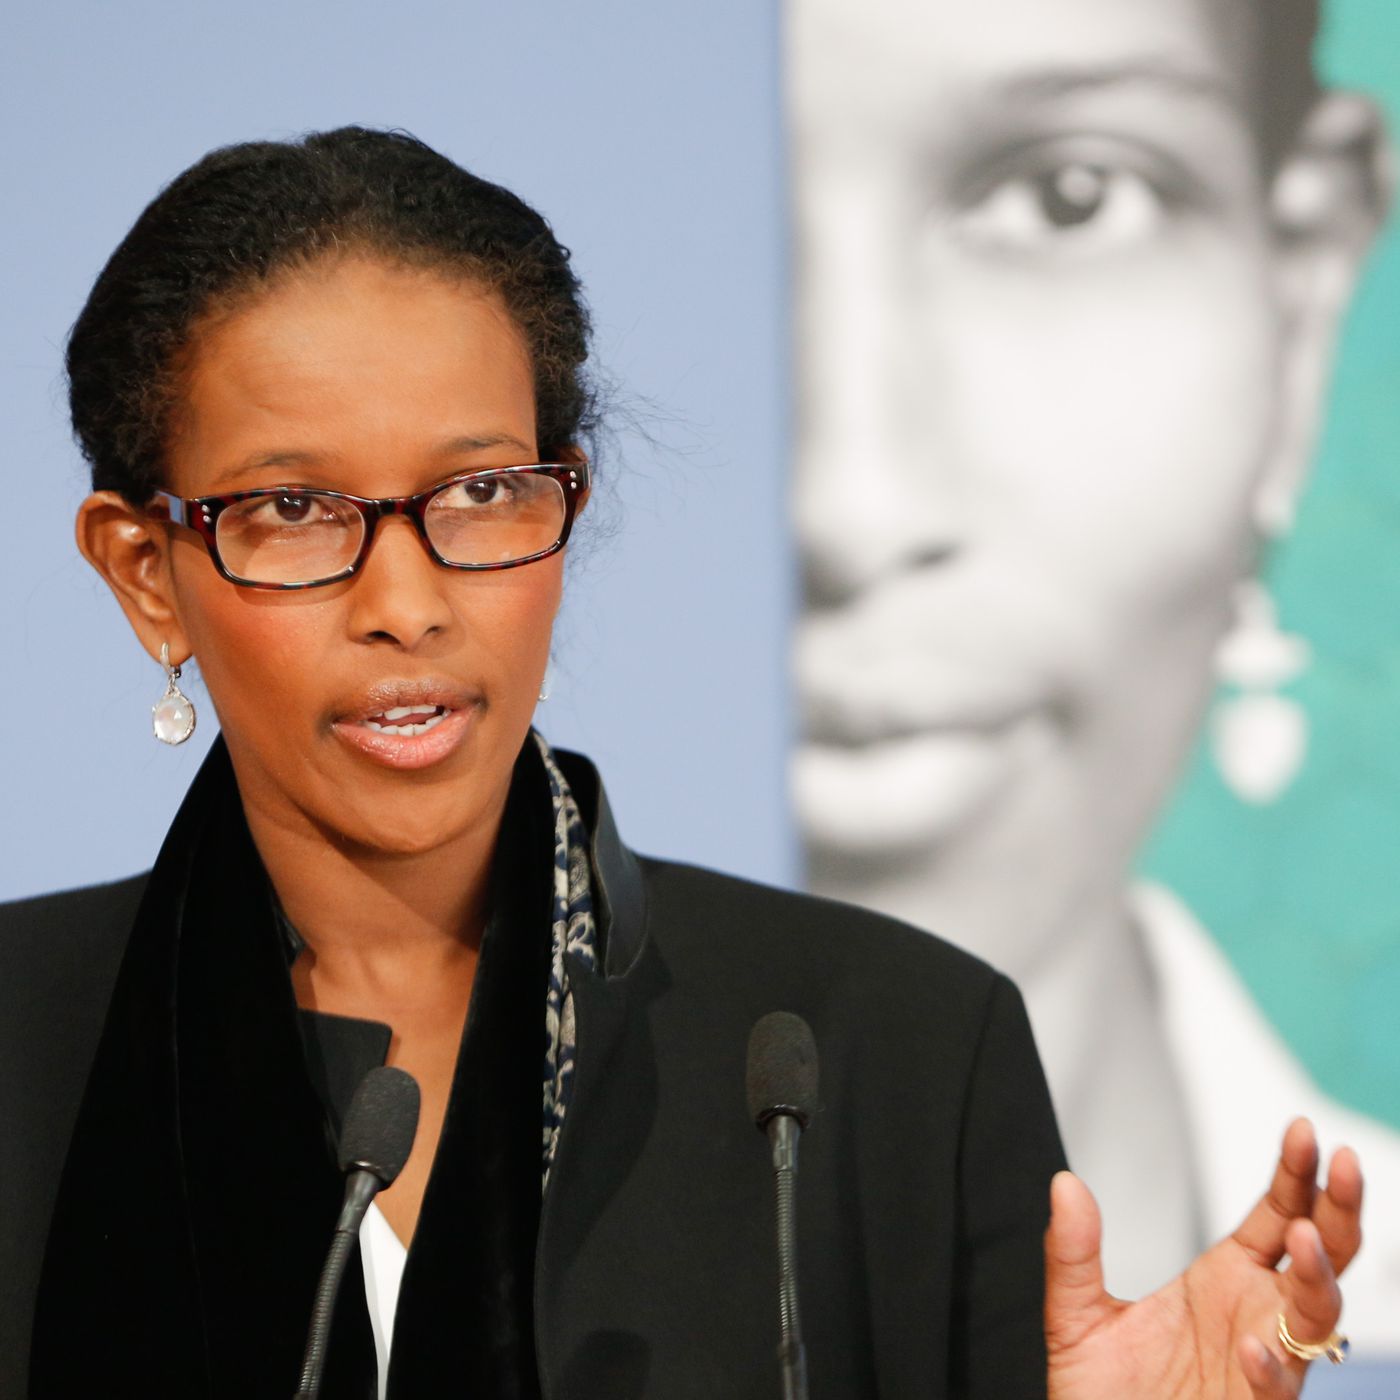 The Ayaan Hirsi Ali problem: why do anti-Islam Muslims keep getting promoted as "experts"? - Vox